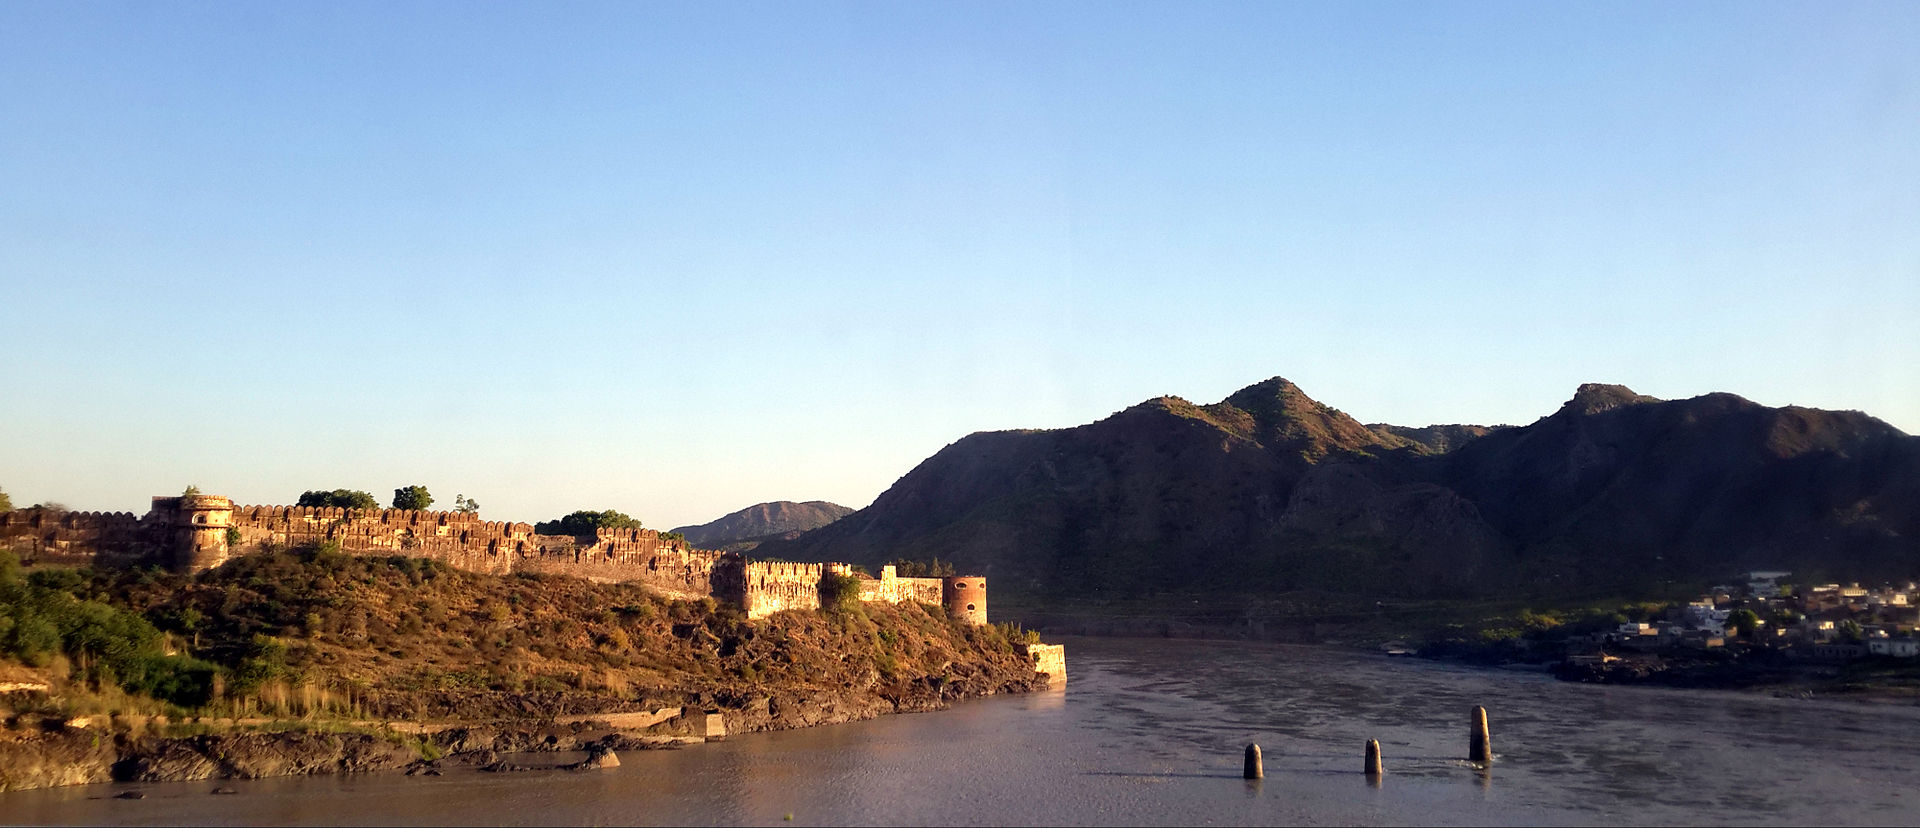 1920px-Attock_Fort_During_Sunset.jpg